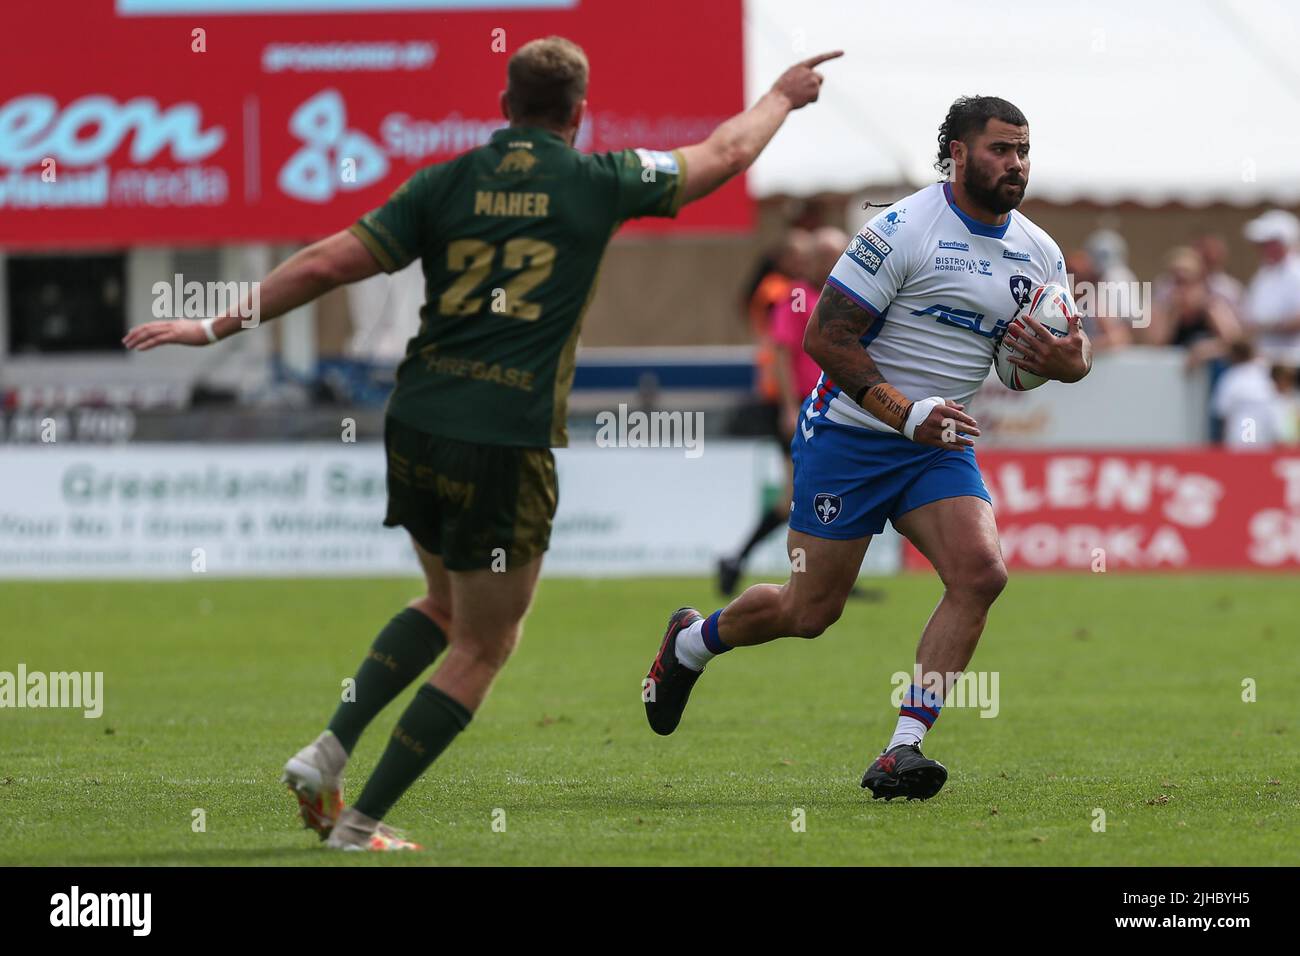 David Fifita #35 of Wakefield Trinity in action during the game Stock Photo